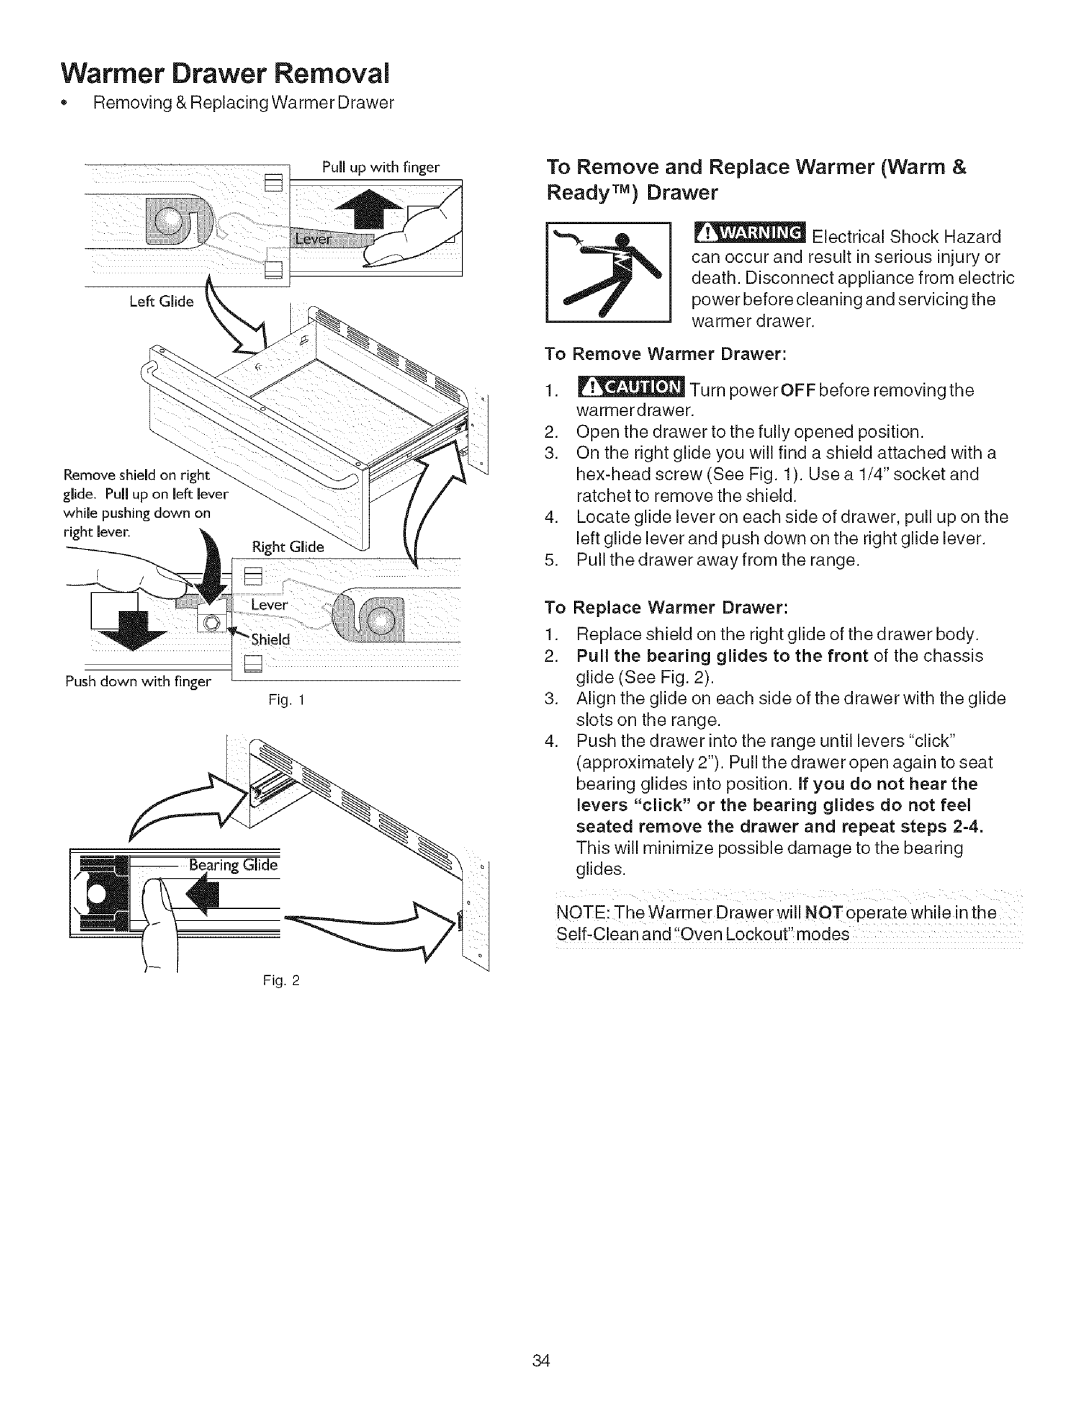 Kenmore 790.9659 manual Warmer Drawer Removal, To Remove and Replace Warmer Warm, Ready TM Drawer 